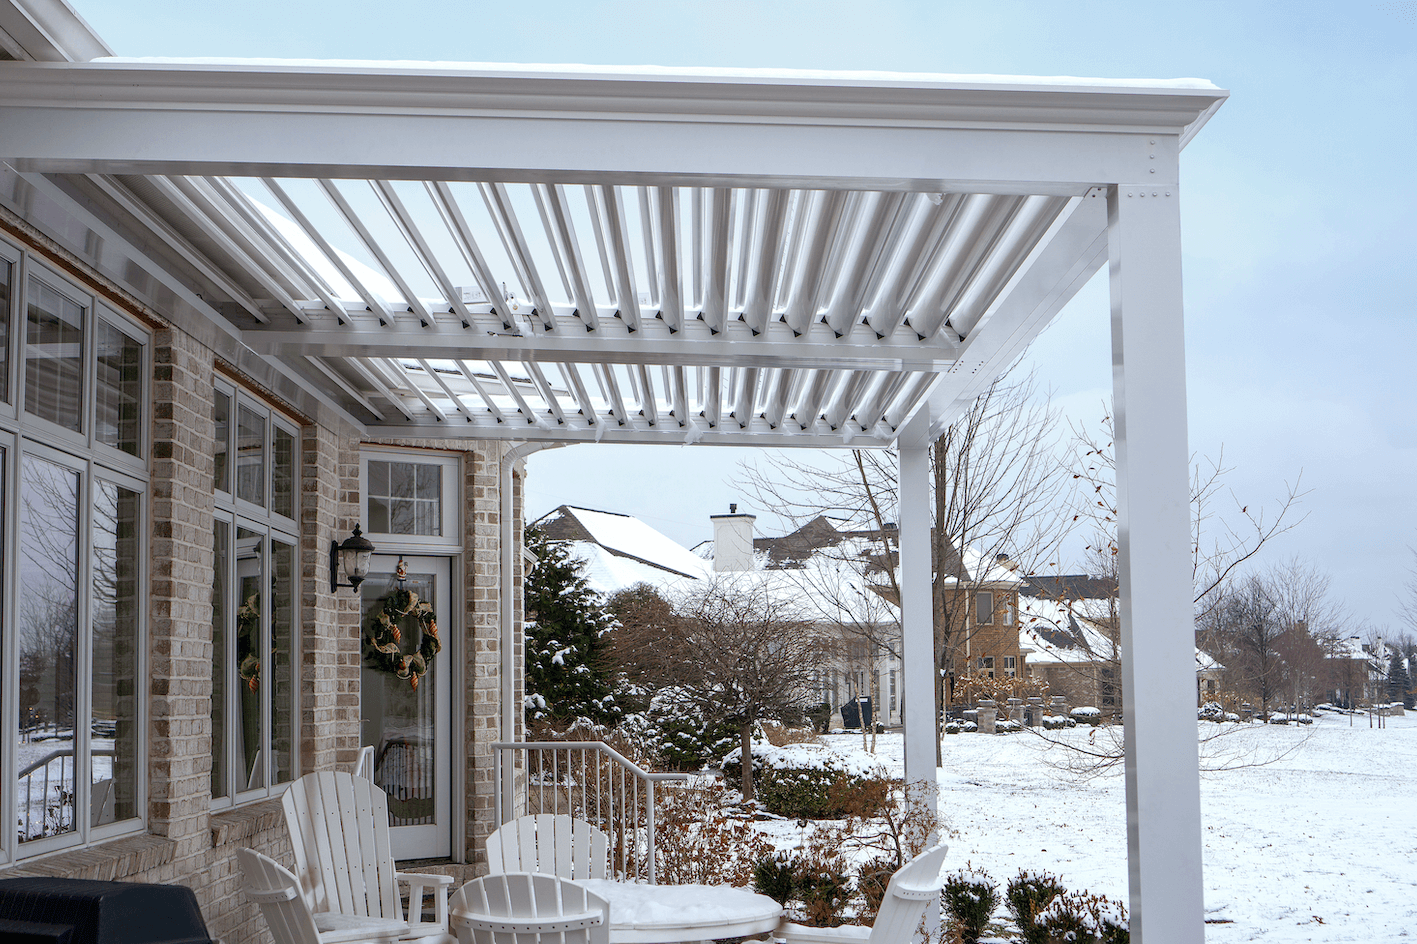 Protect your pergola from insects and inclement weather with well constructed pergola.